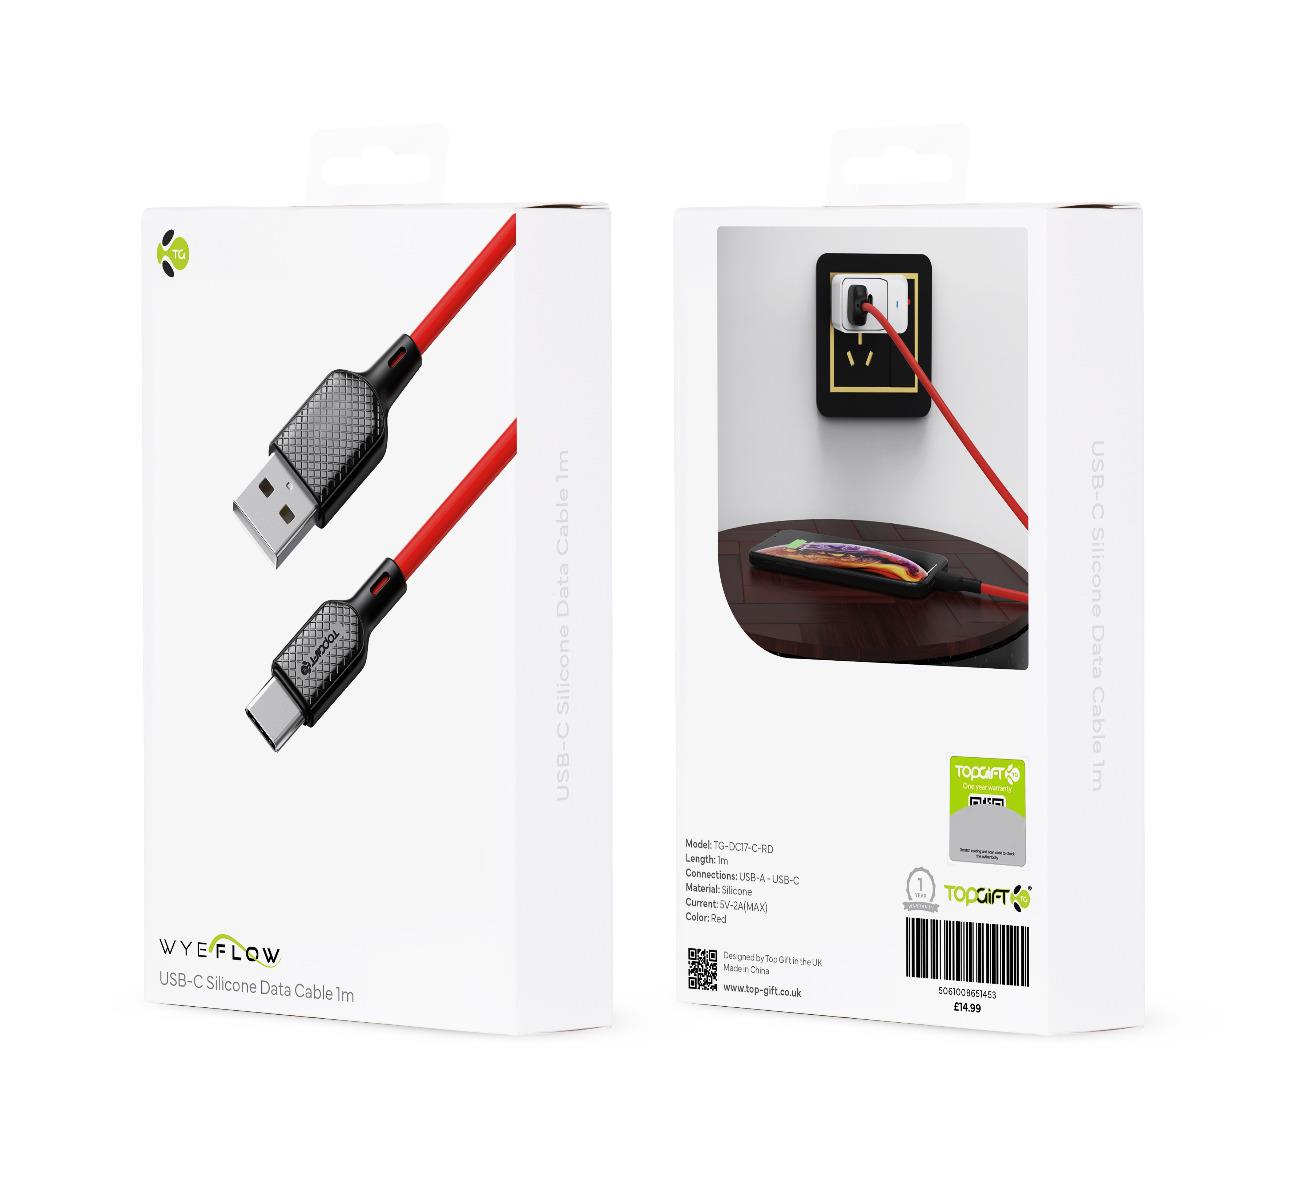 WYEFLOW USB-C Silicone Data Cable Red